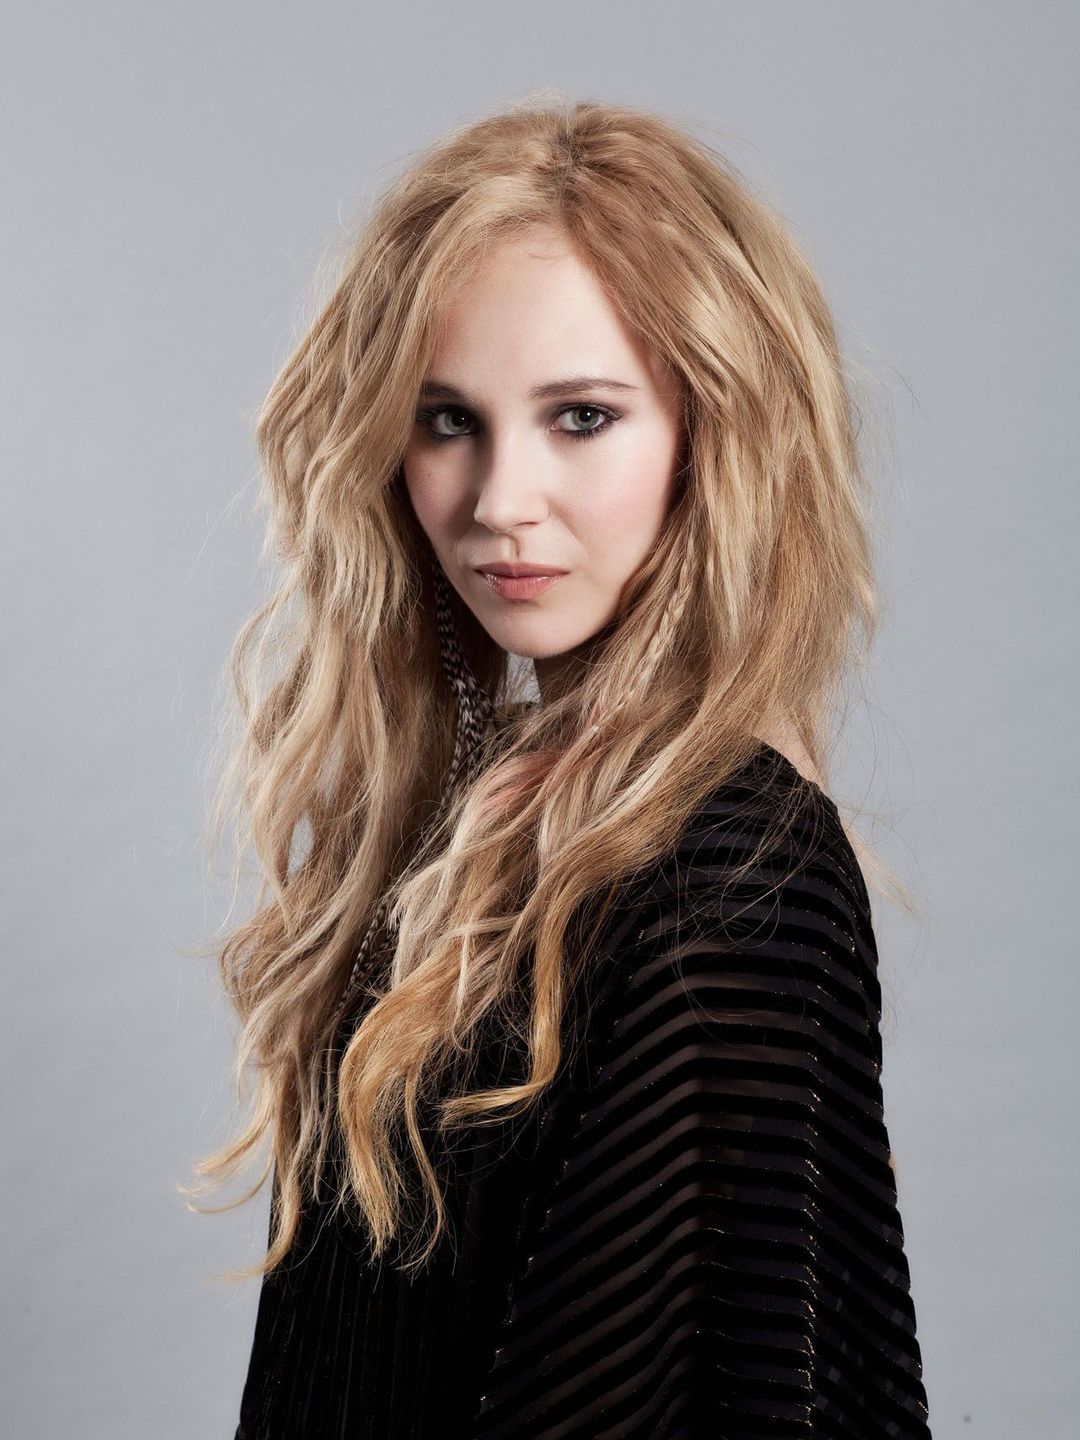 Juno Temple does she have kids